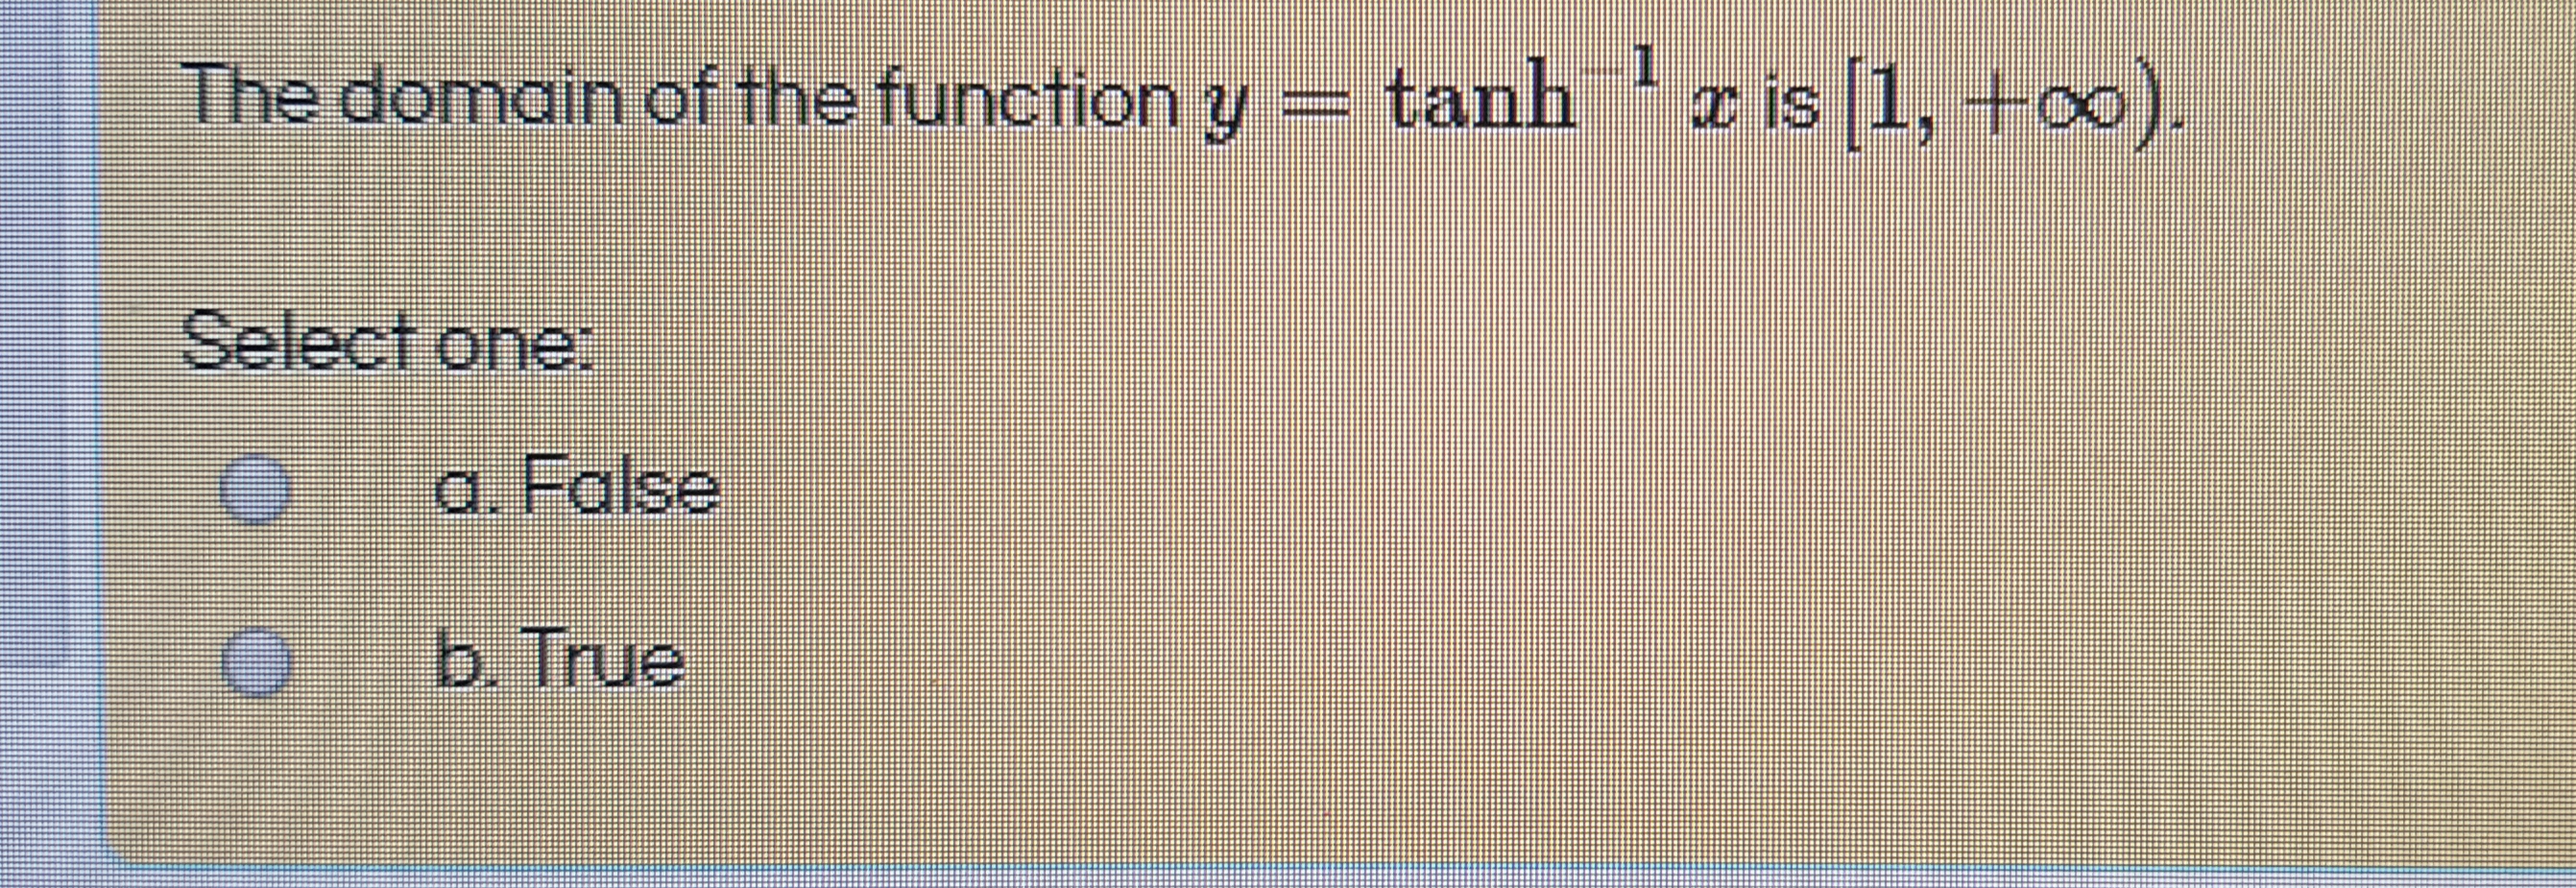 The domain of the function y
tanh z is 1, +∞).
Select one:
a. False
Ob. True
